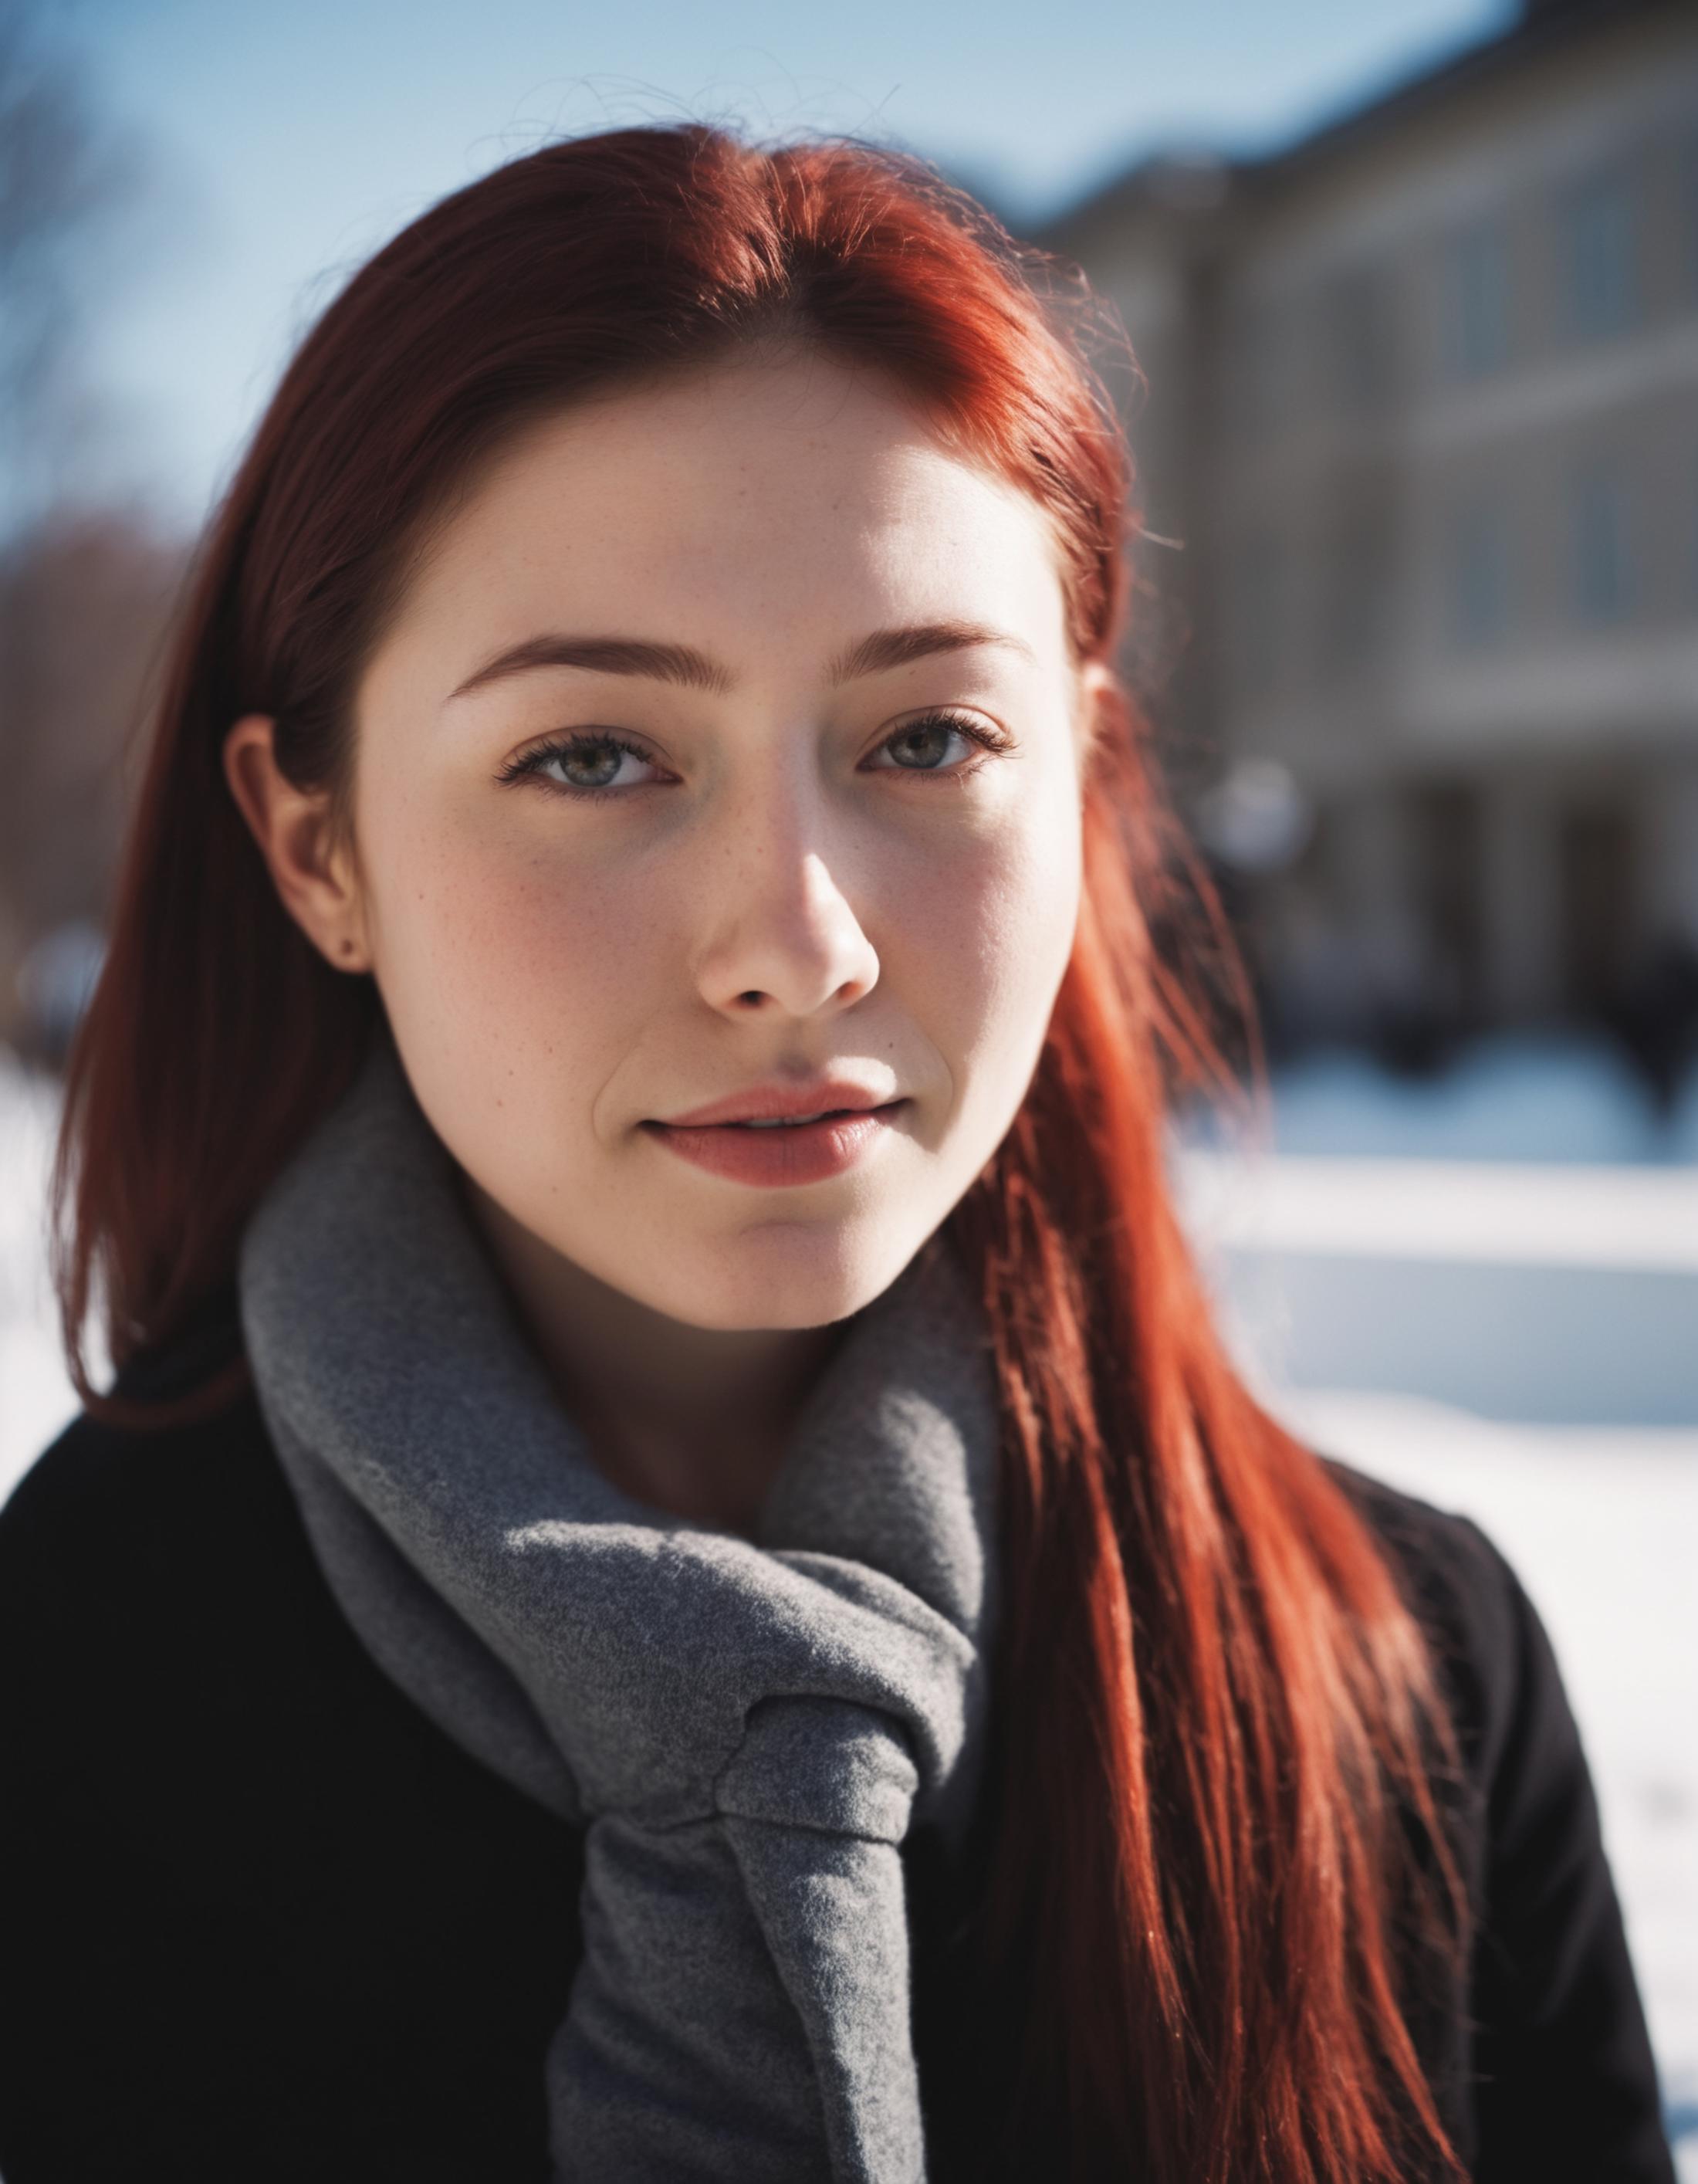 A young red-haired woman wearing a gray scarf.